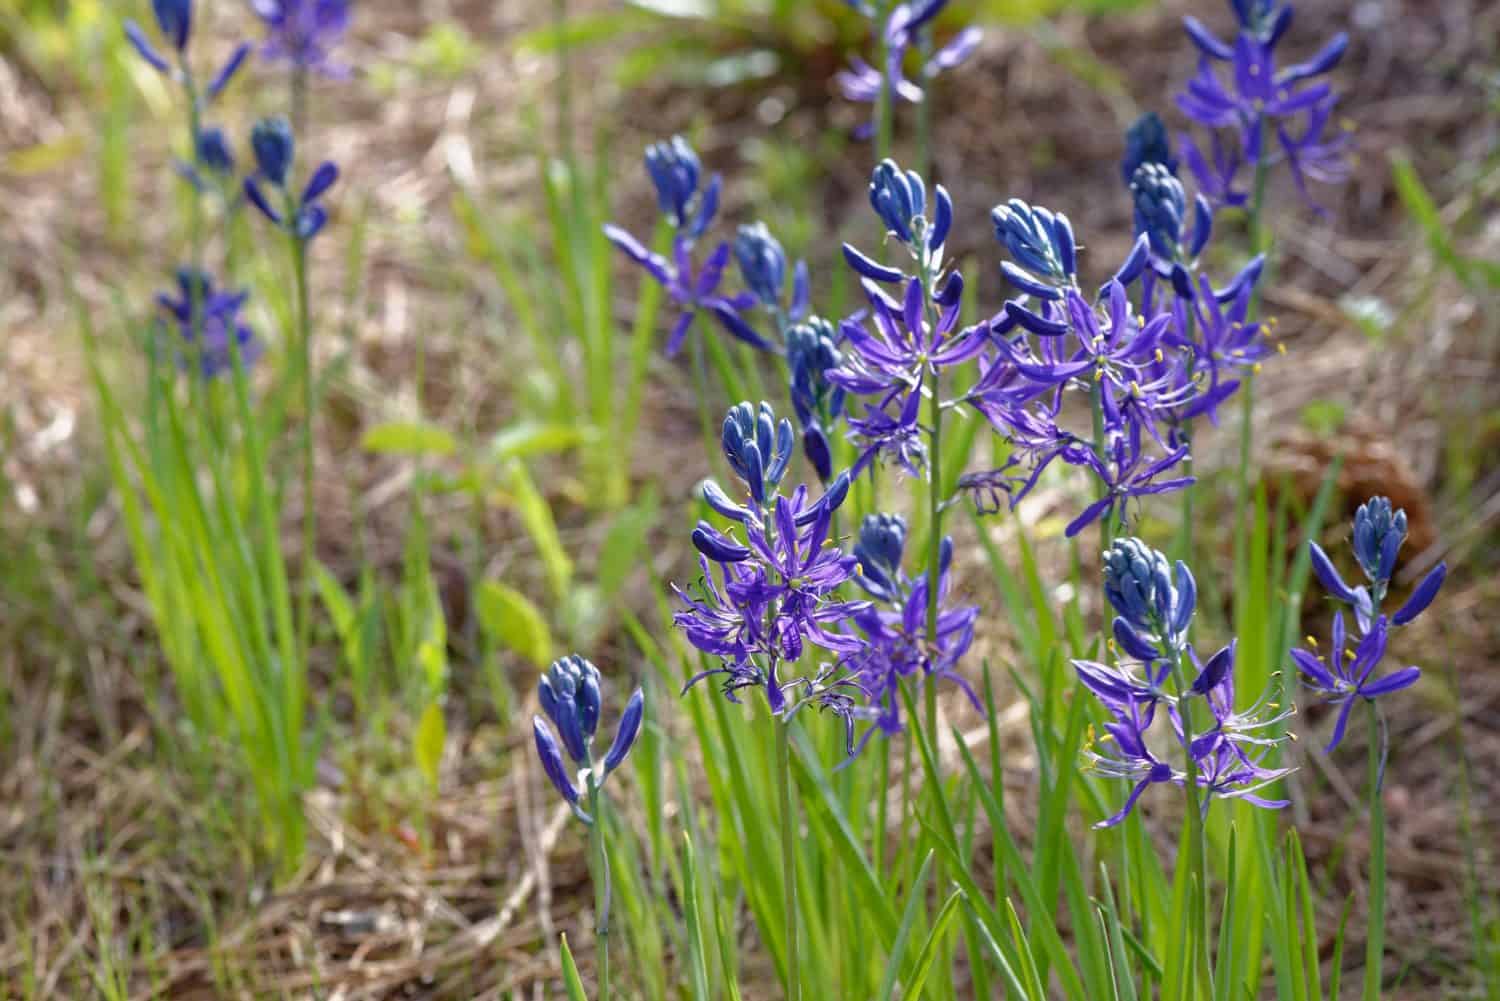 Camassia scilloides is a bulbous garden plant from USA